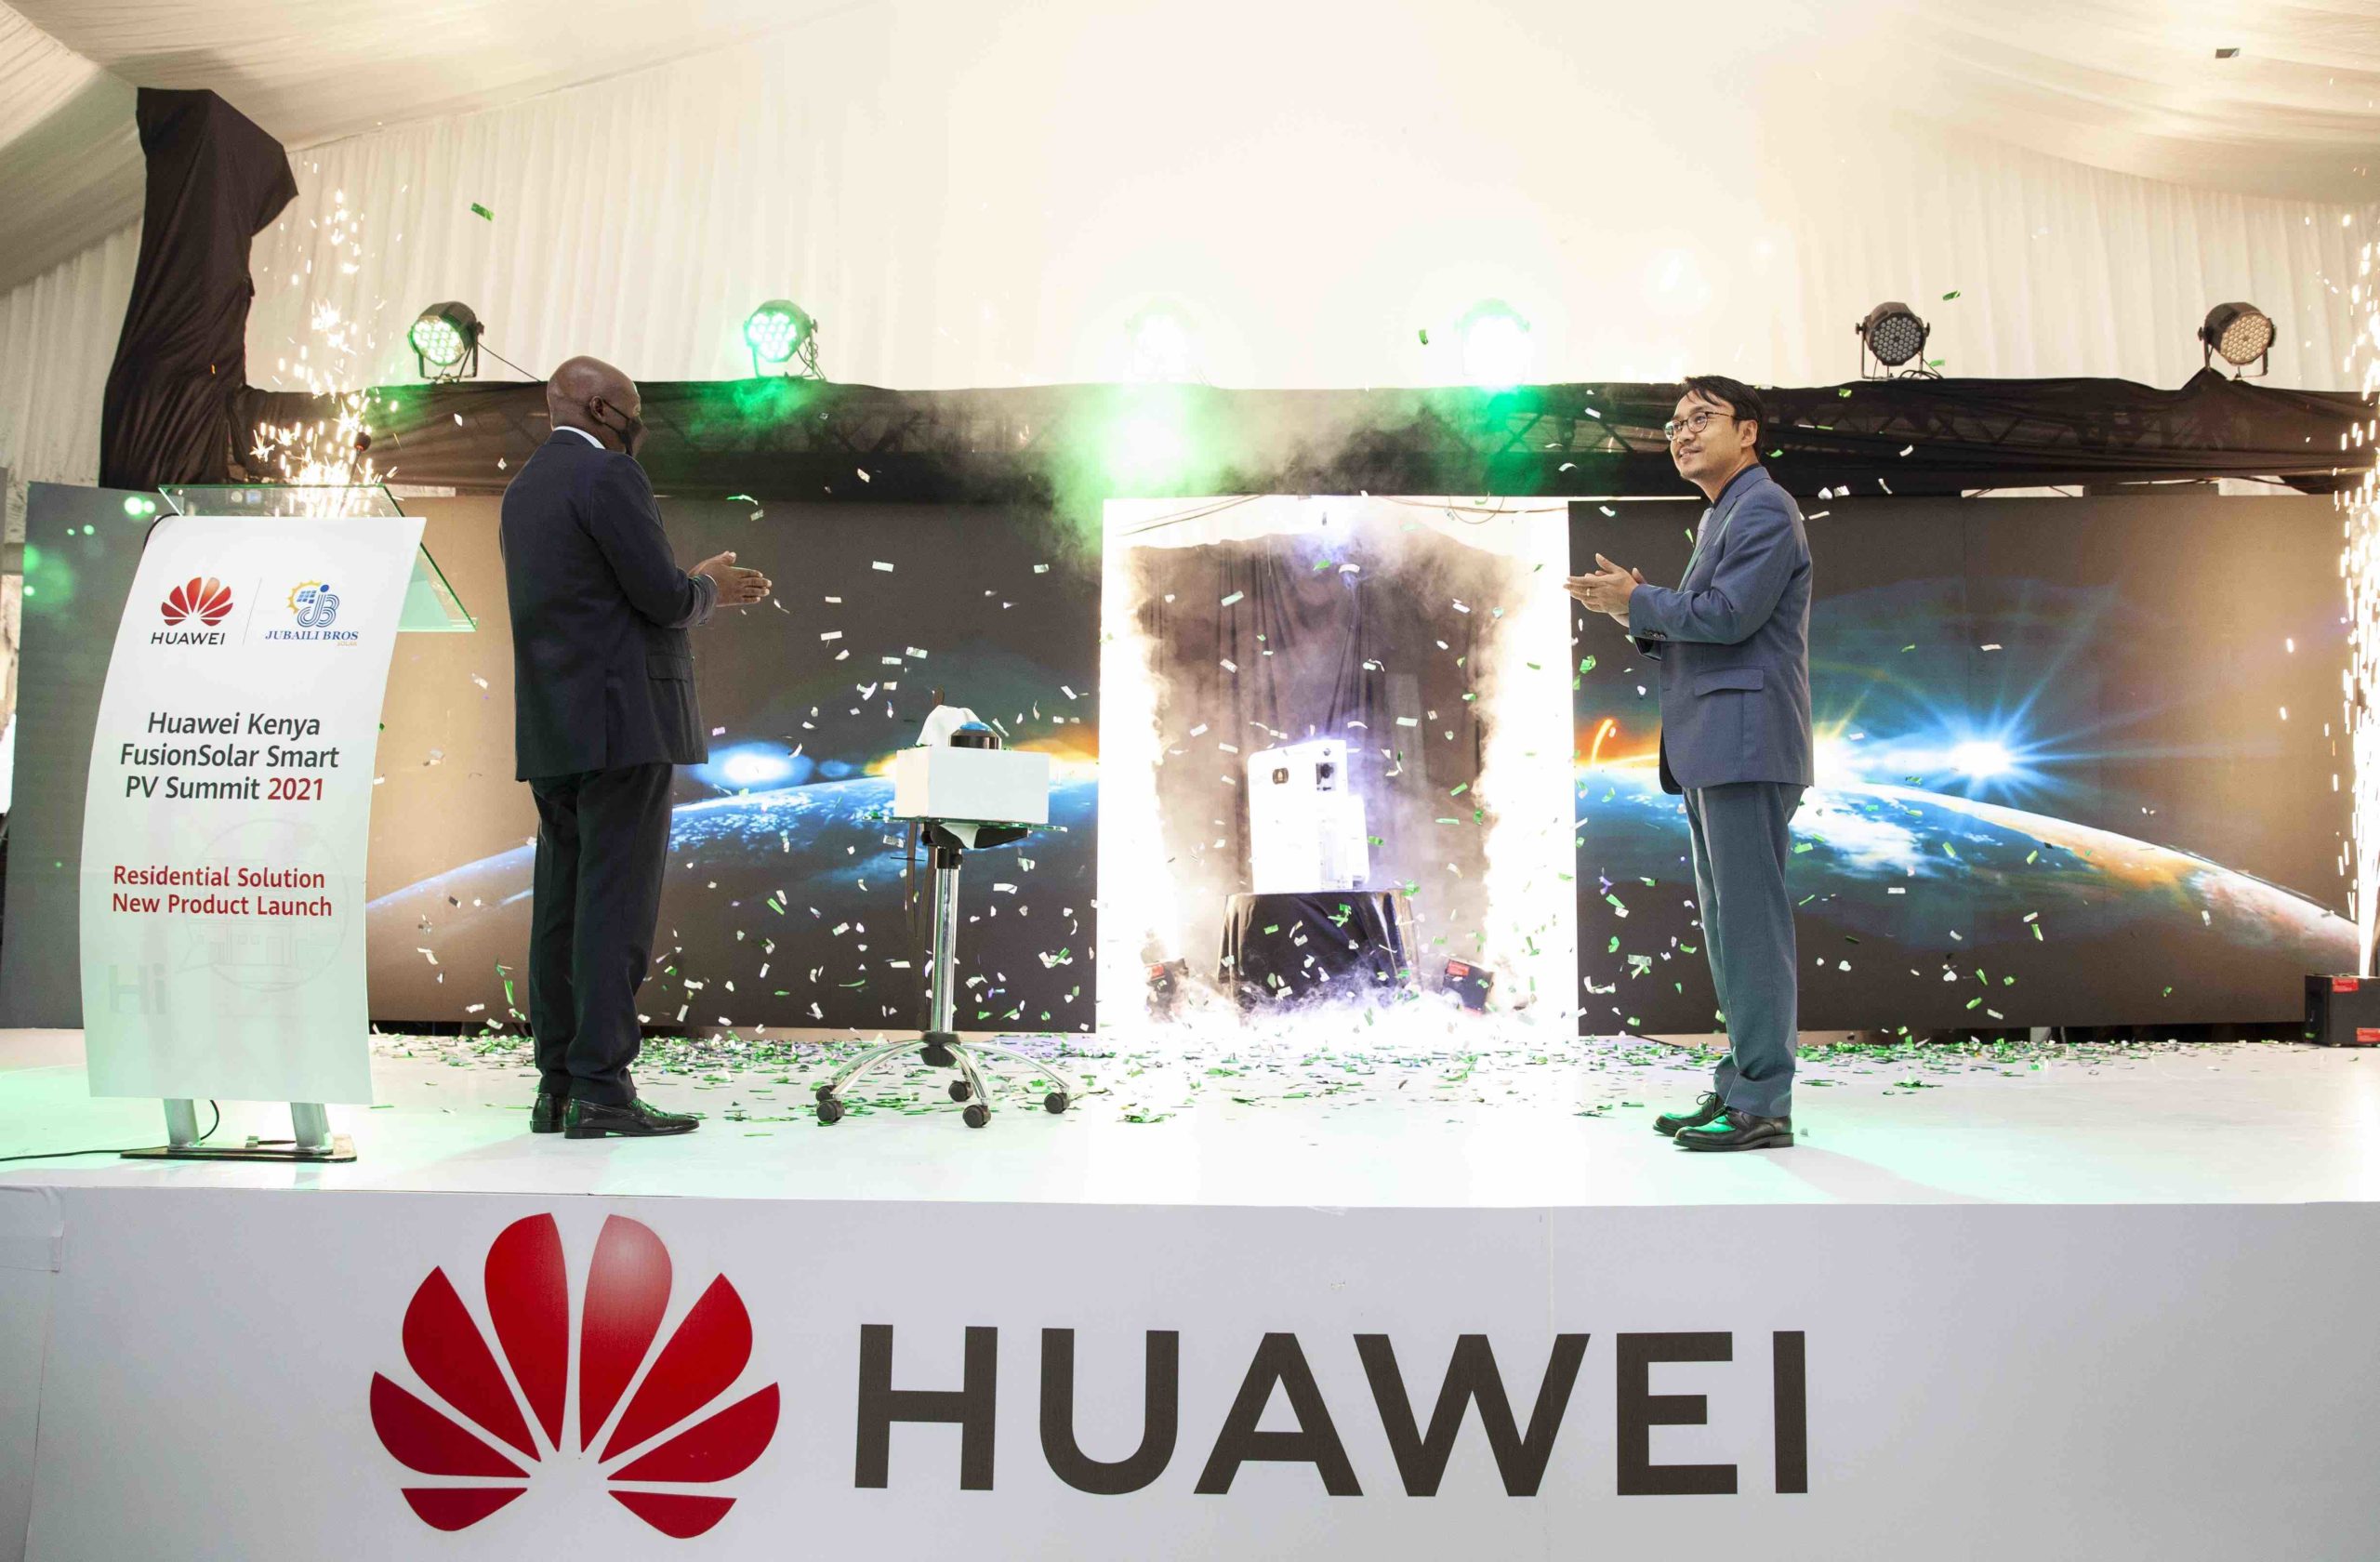 Huawei Launches Smart Solar Energy System for Kenyan Homes